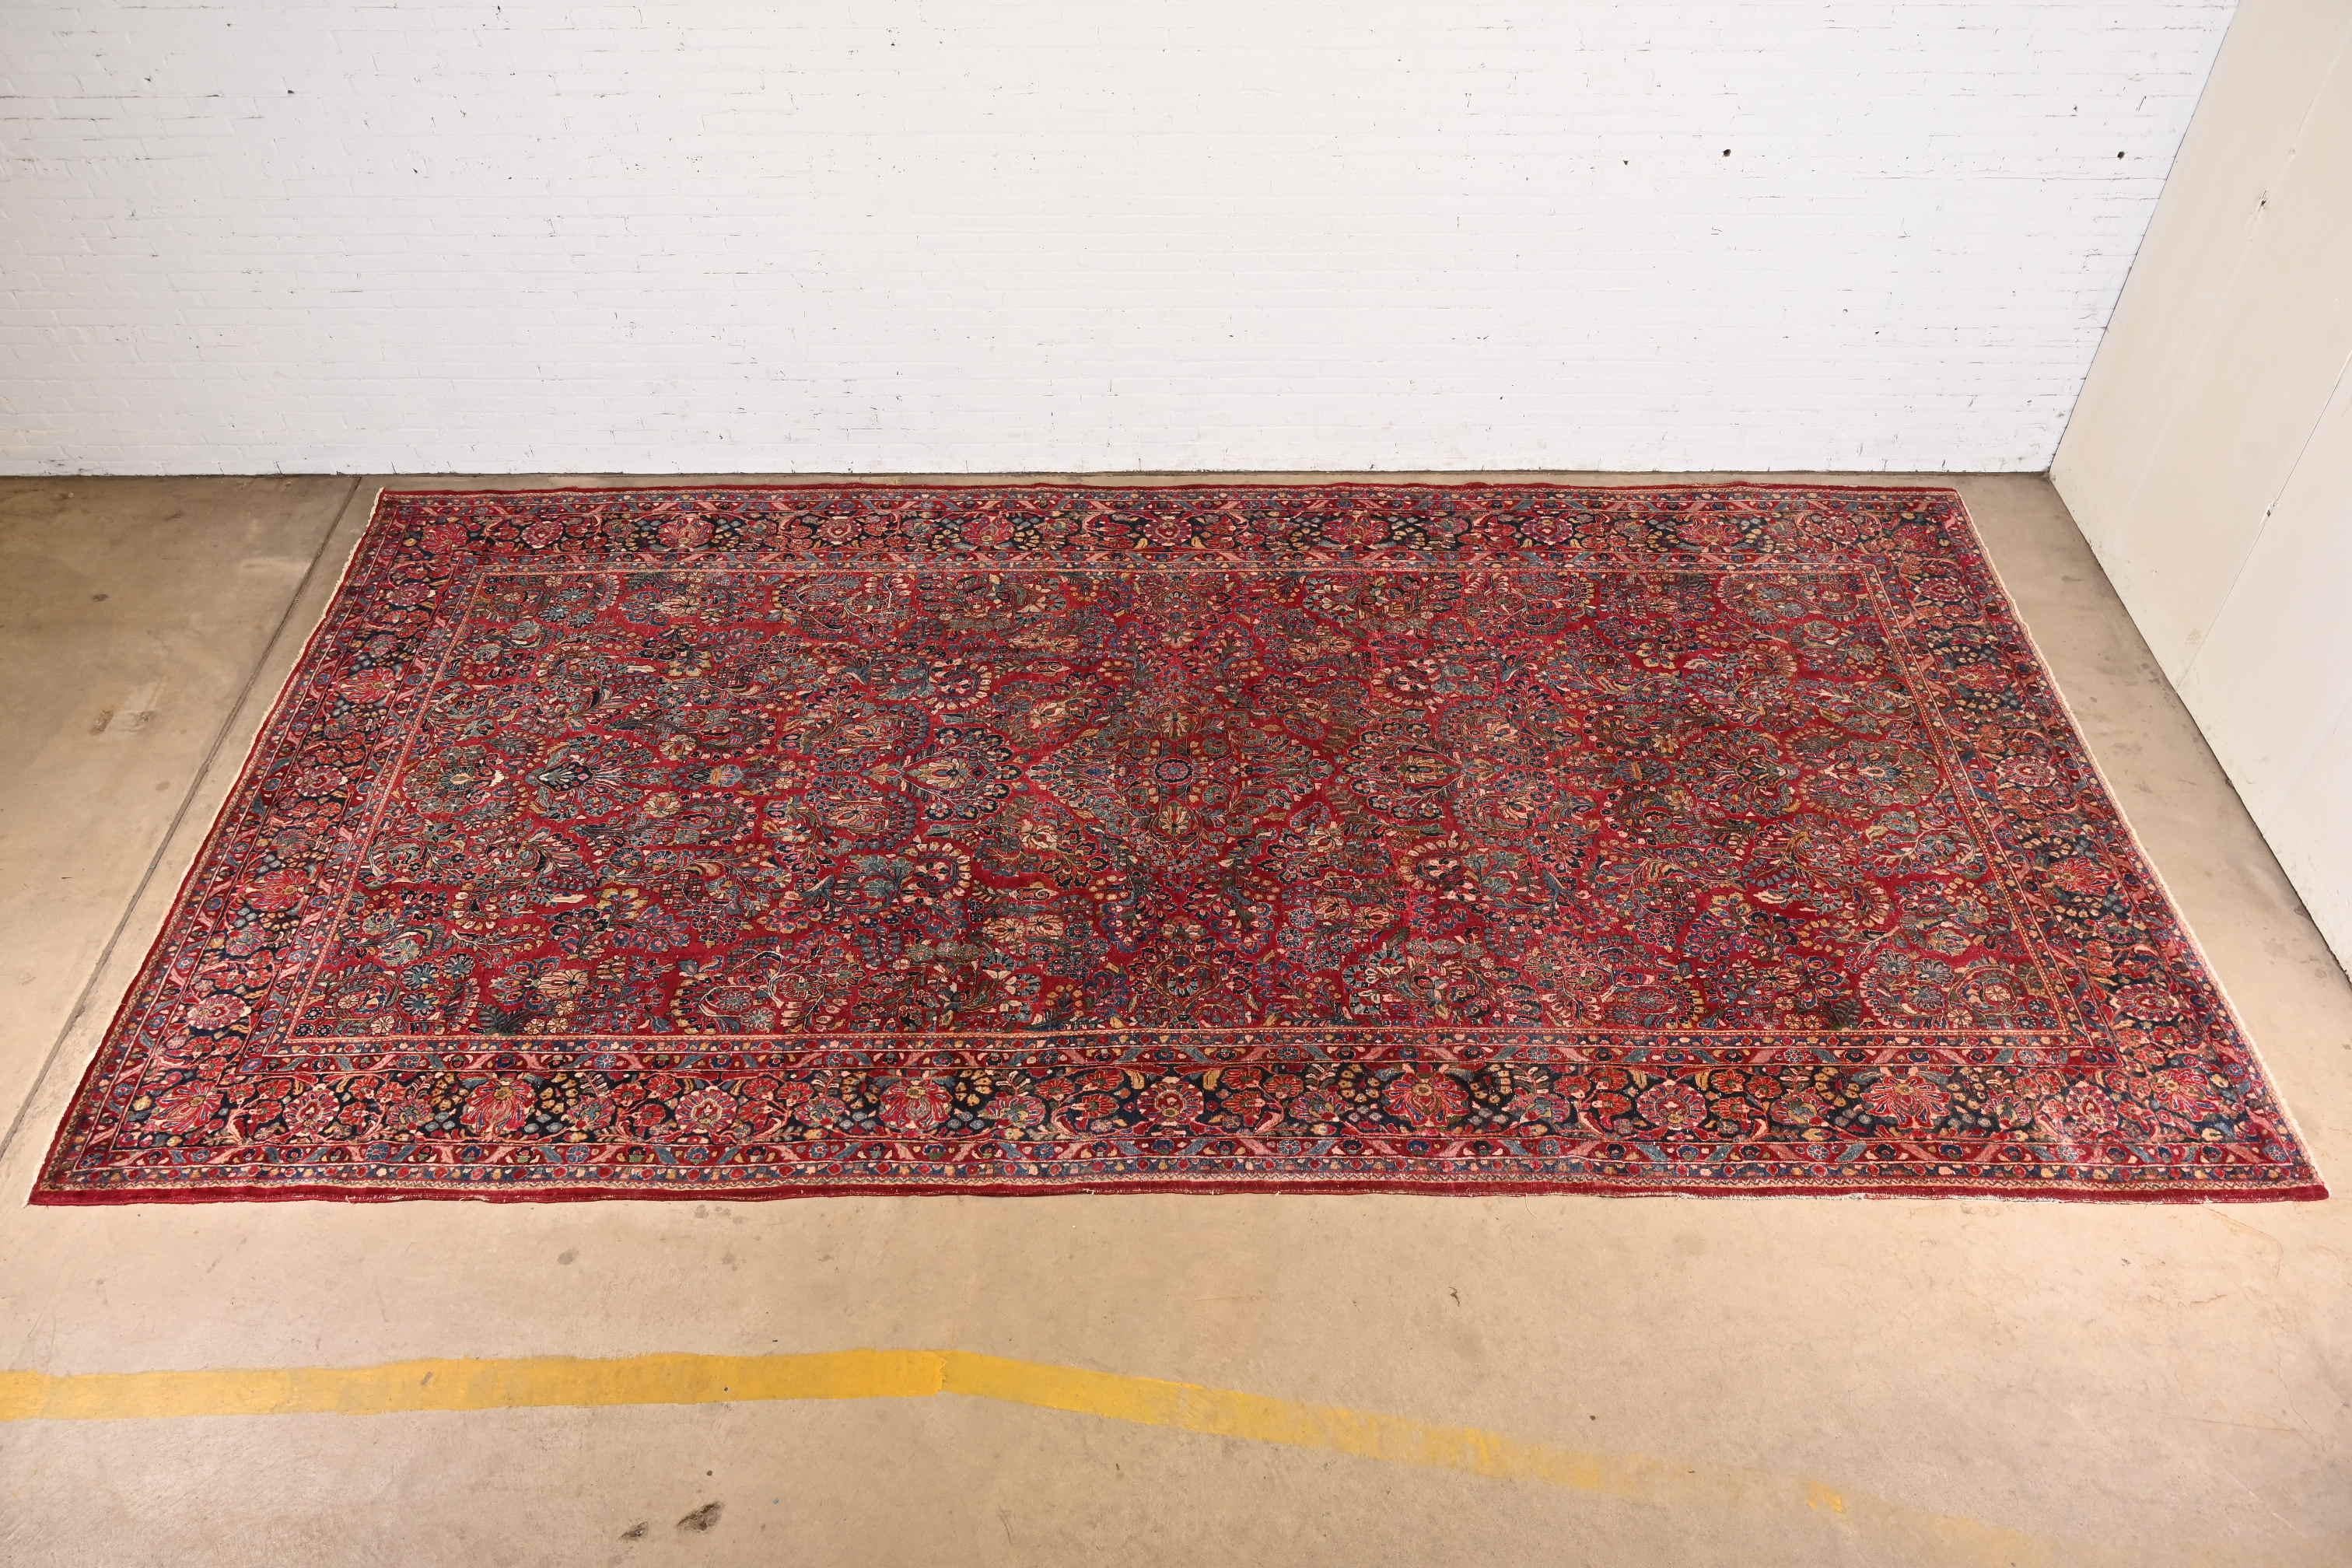 A gorgeous antique Persian Sarouk large room size rug

Circa 1920s

Features beautiful traditional floral sprays and bouquets, with predominant colors in red, blue, and ivory.

Measures: 9'11